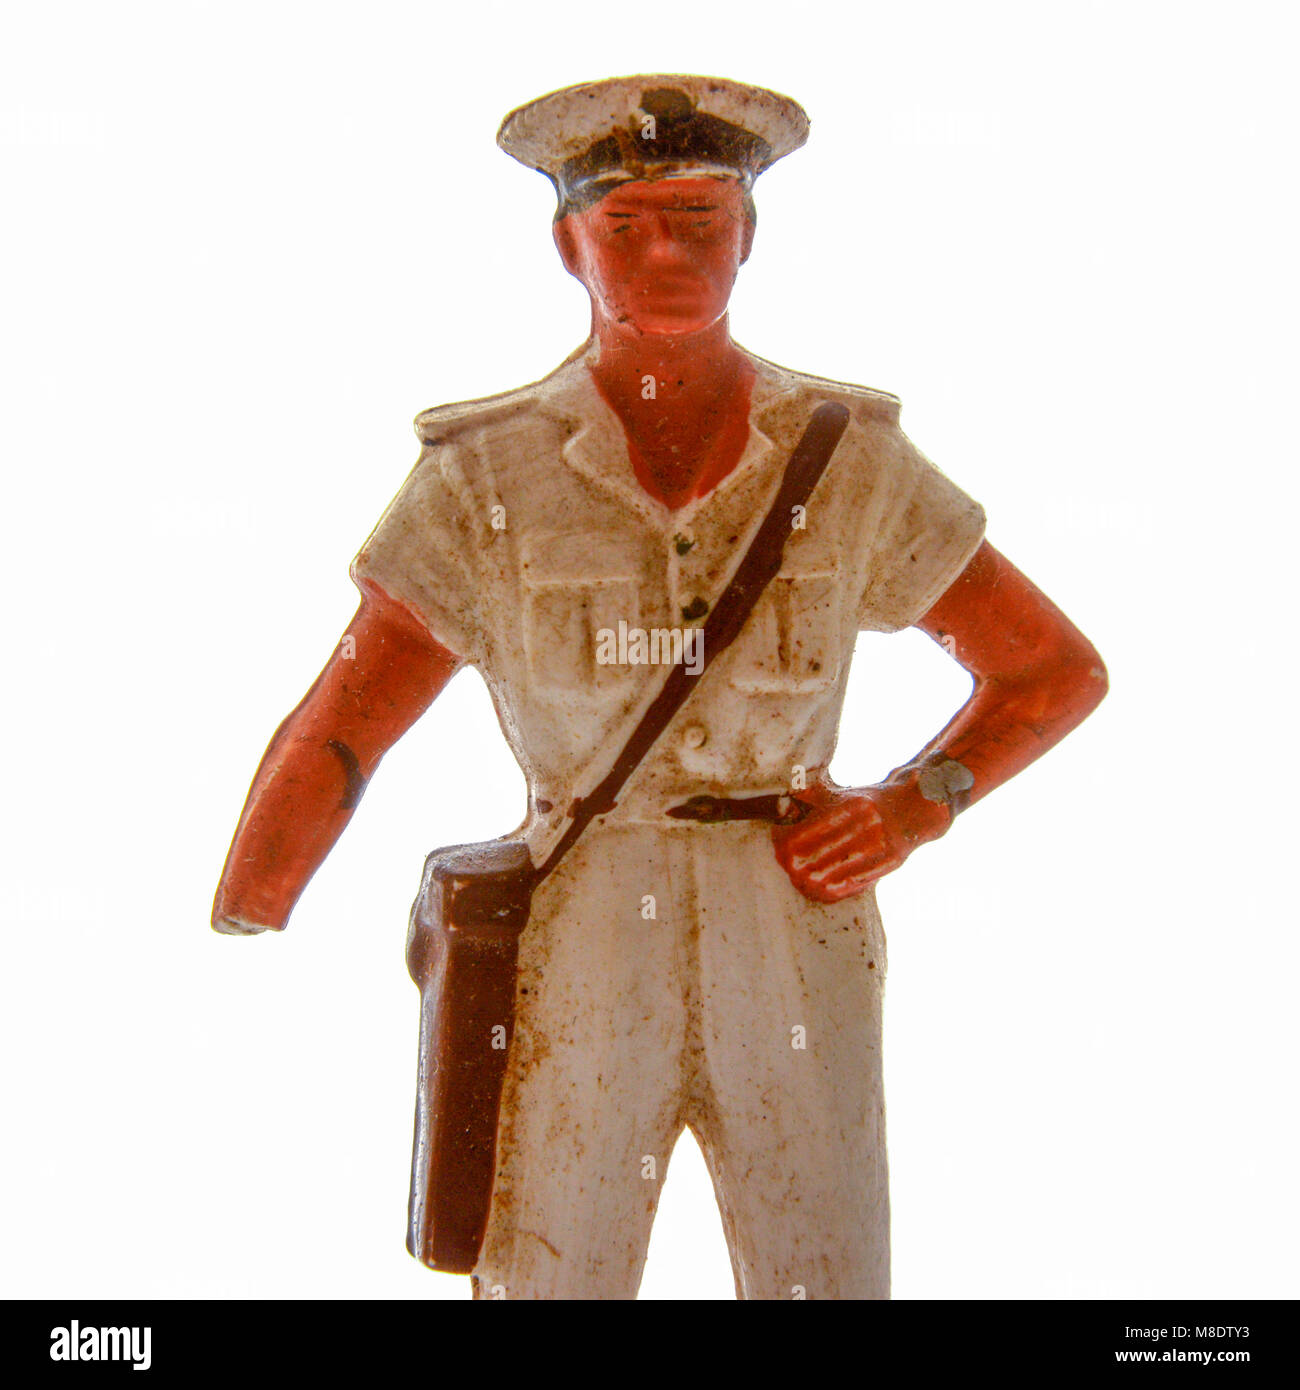 Figurine of soldier with a broken arm. Stock Photo